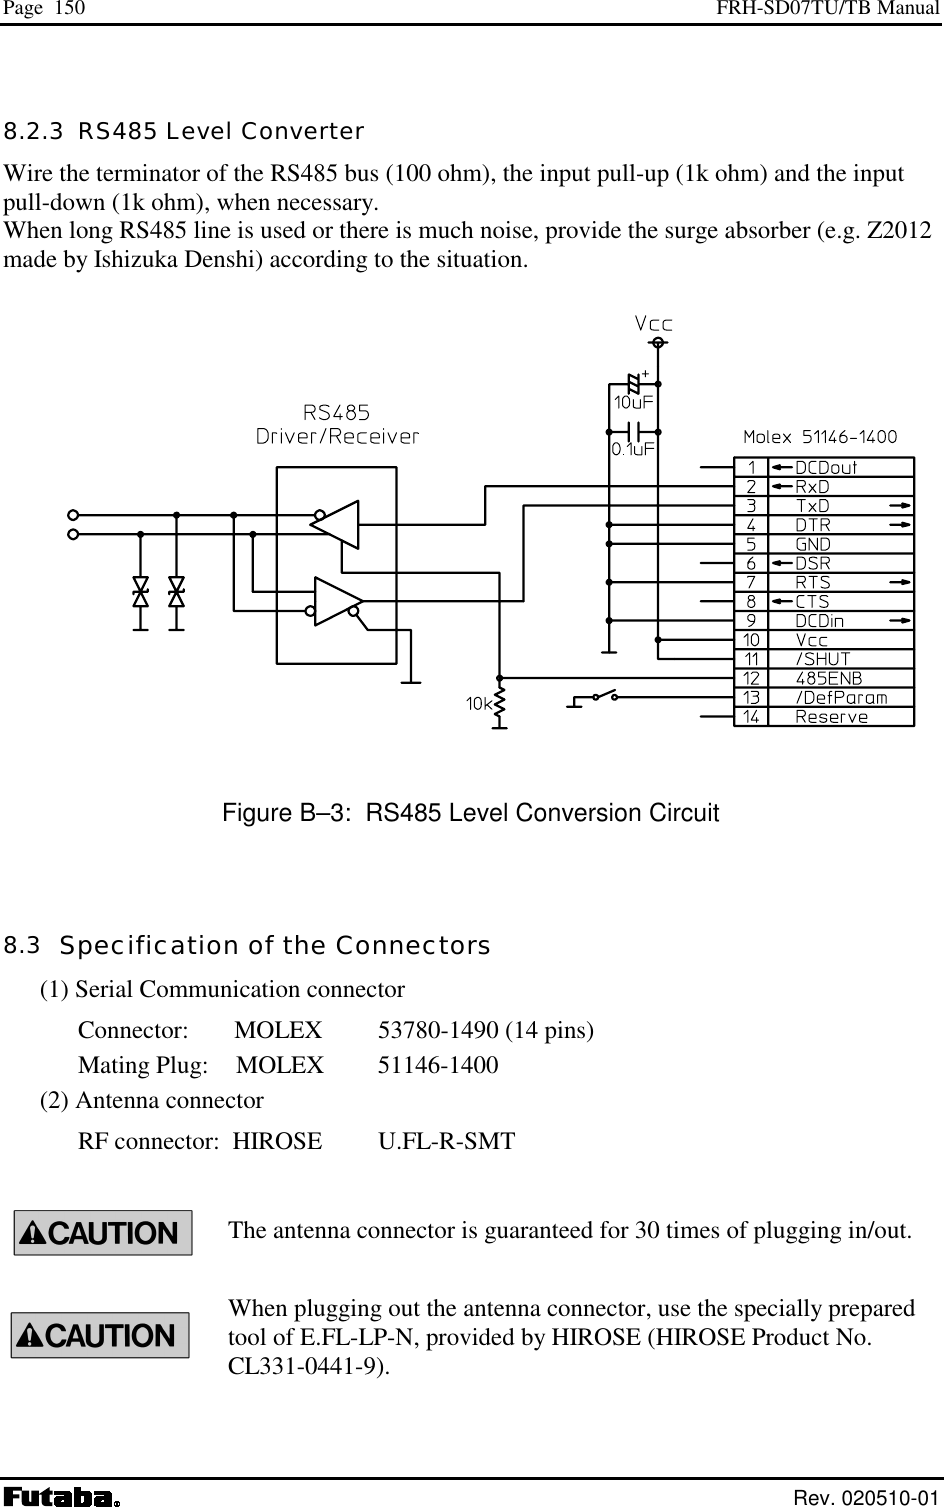 Page  150  FRH-SD07TU/TB Manual  Rev. 020510-01 8.2.3  RS485 Level Converter Wire the terminator of the RS485 bus (100 ohm), the input pull-up (1k ohm) and the input pull-down (1k ohm), when necessary. When long RS485 line is used or there is much noise, provide the surge absorber (e.g. Z2012 made by Ishizuka Denshi) according to the situation.    Figure B–3:  RS485 Level Conversion Circuit  8.3  Specification of the Connectors (1) Serial Communication connector Connector:     MOLEX   53780-1490 (14 pins) Mating Plug:    MOLEX   51146-1400 (2) Antenna connector RF connector:  HIROSE  U.FL-R-SMT  The antenna connector is guaranteed for 30 times of plugging in/out. When plugging out the antenna connector, use the specially prepared tool of E.FL-LP-N, provided by HIROSE (HIROSE Product No. CL331-0441-9).   